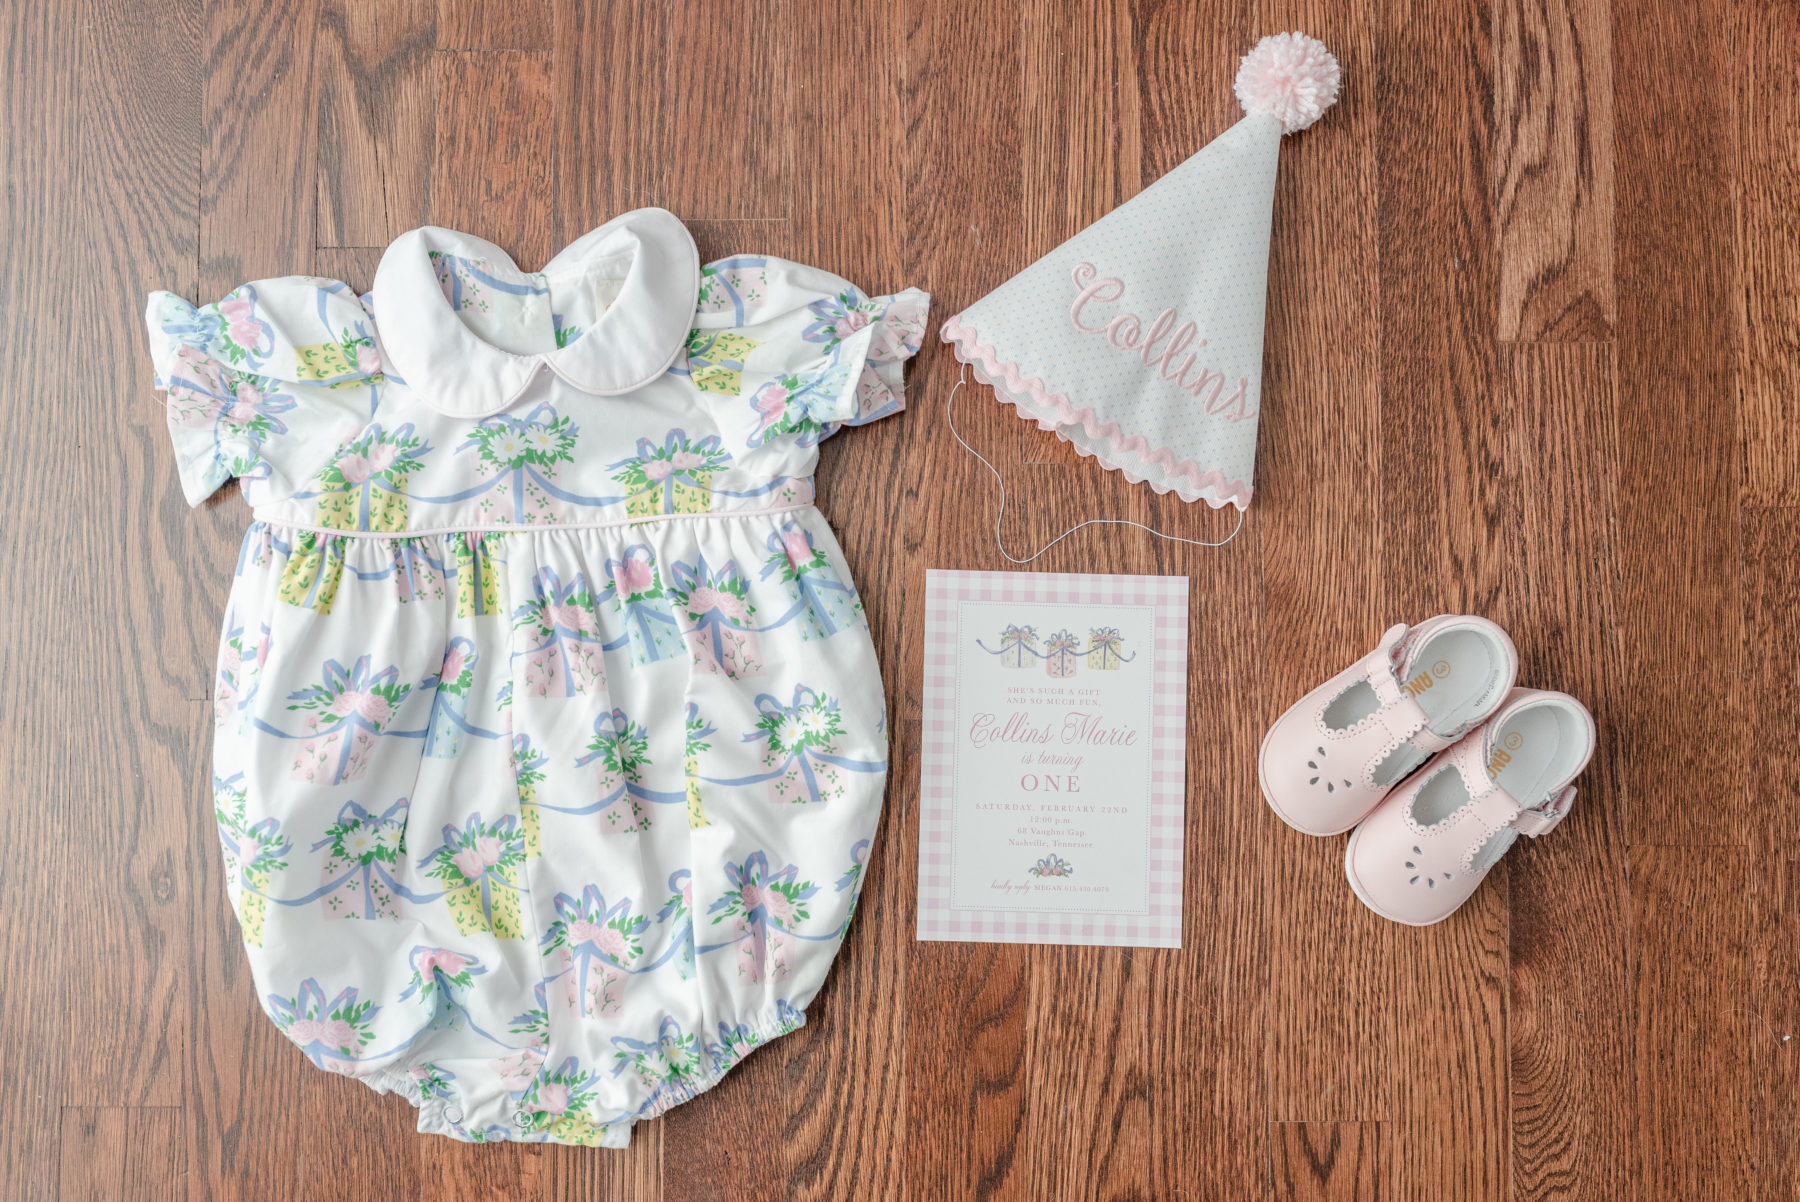 Gorgeous Pastel 1st Birthday Party by Dolly Delong featured on Nashville Baby Guide